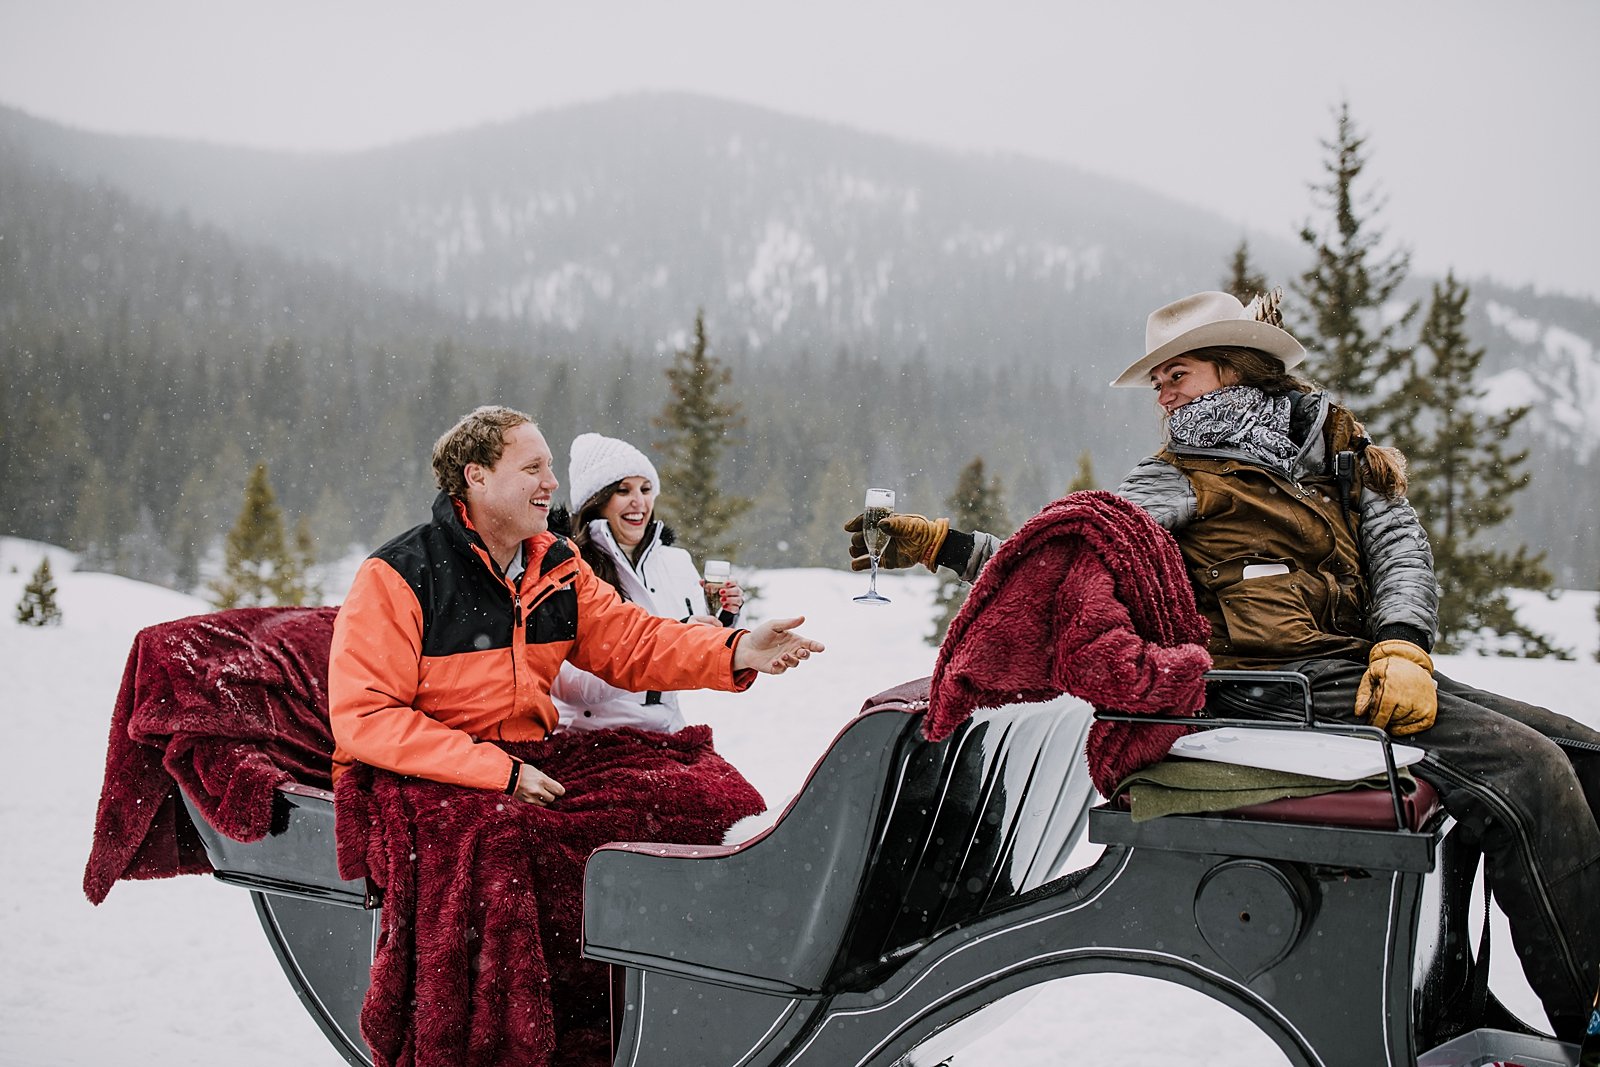 guide in hat and winter cowboy attire pouring champagne for couple while sitting on the sleigh, open one horse sleigh gliding through the snow, breckenridge spring break proposal, white bridal beanie